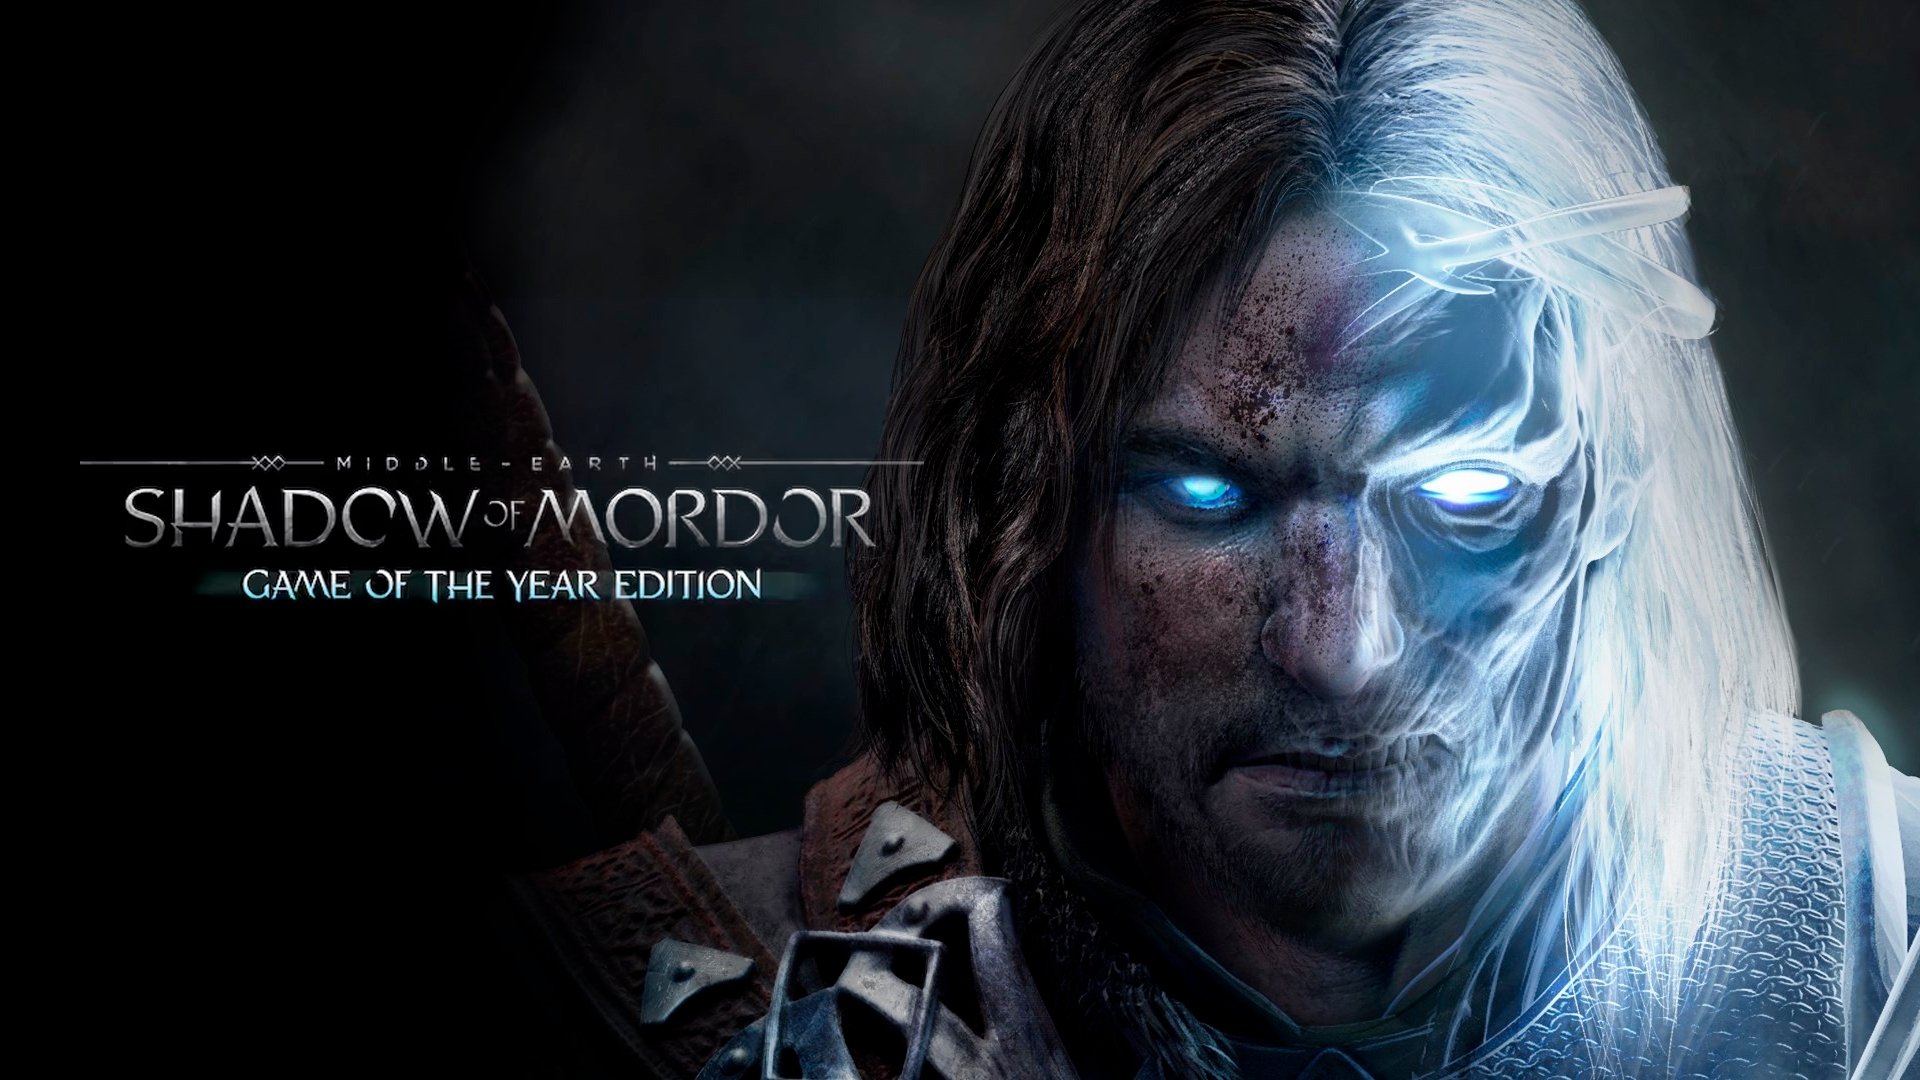 The sequel to 'Shadow of Mordor' arrives August 22nd